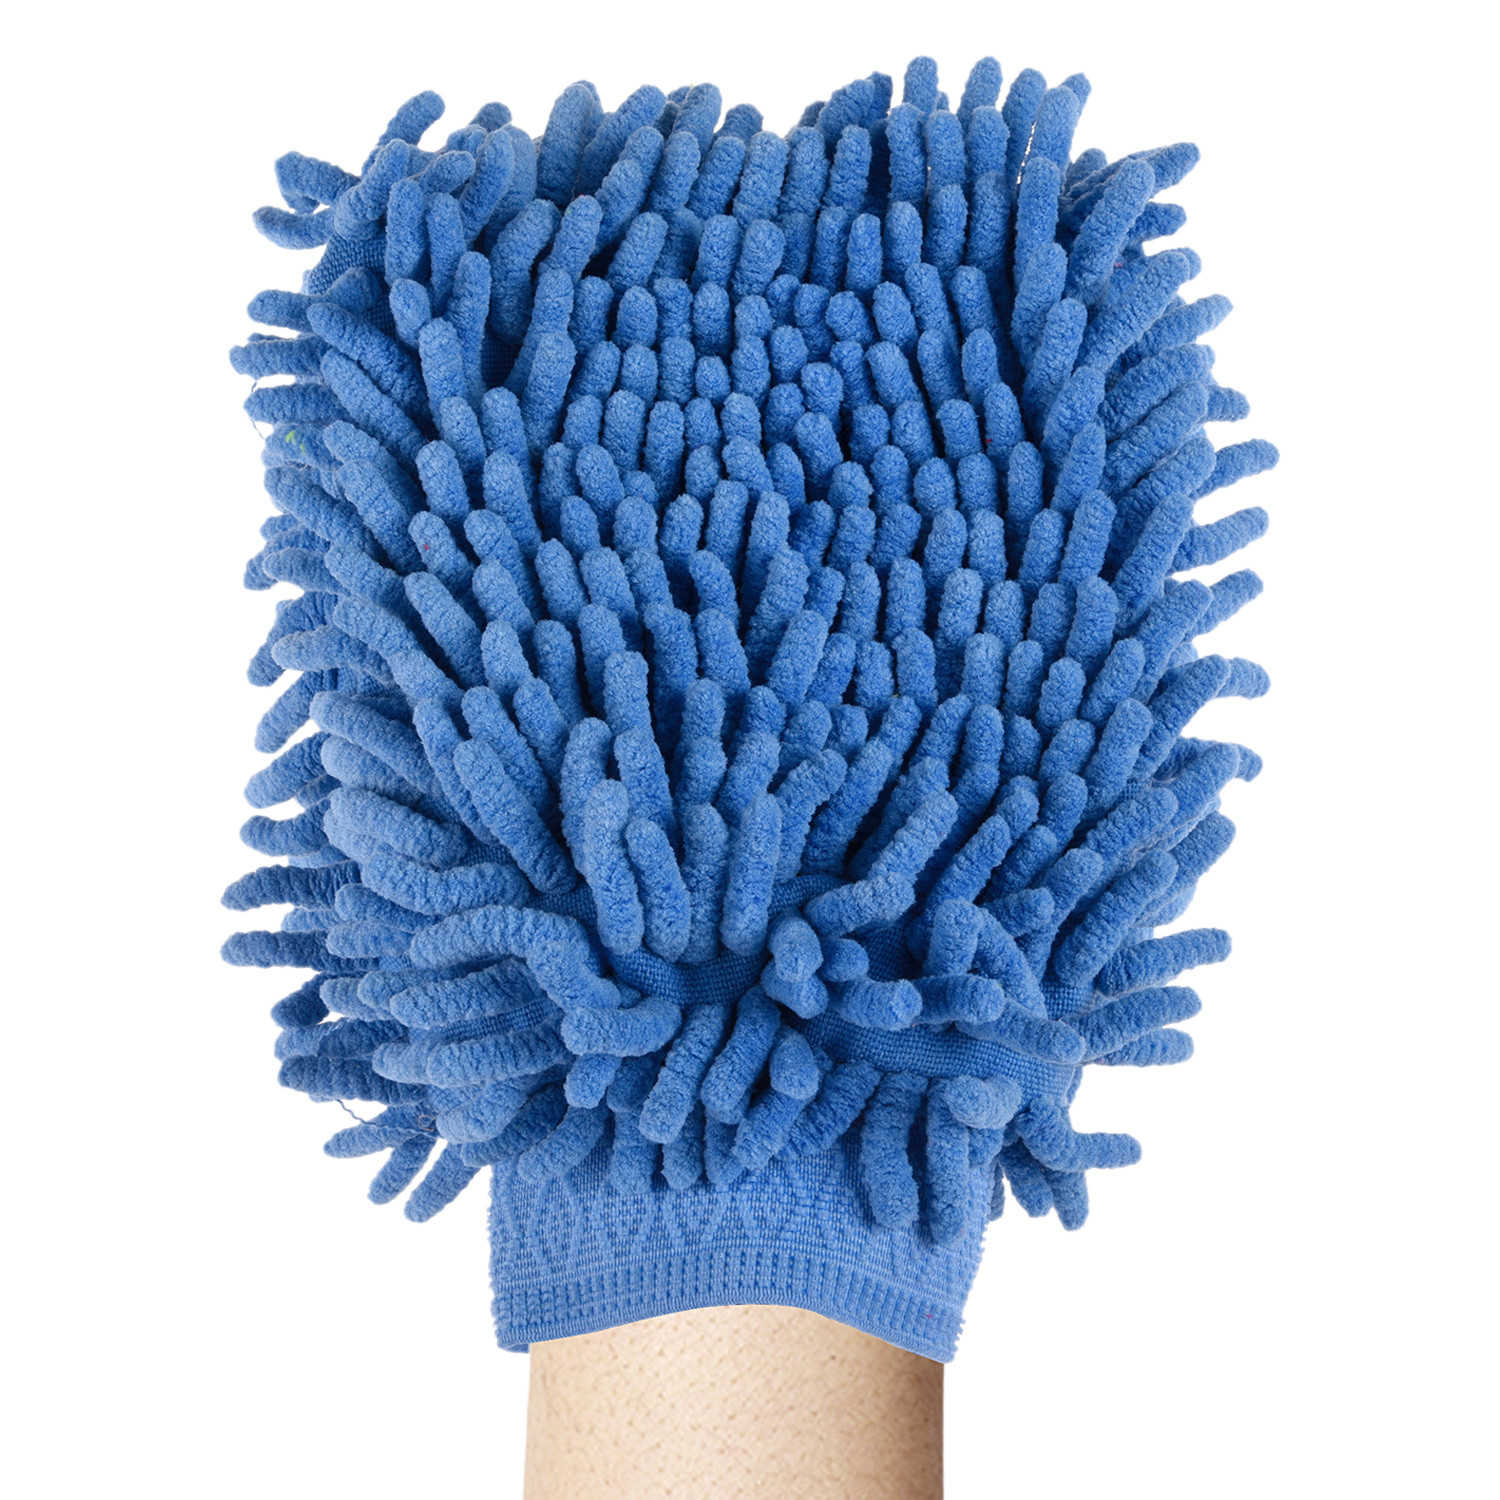 Kuber Industries Chenille Mitts|Microfiber Cleaning Gloves|Inside Waterproof Cloth Gloves|100 Gram Weighted Hand Duster|Hand Chenille Gloves For Car|Glass (Blue)